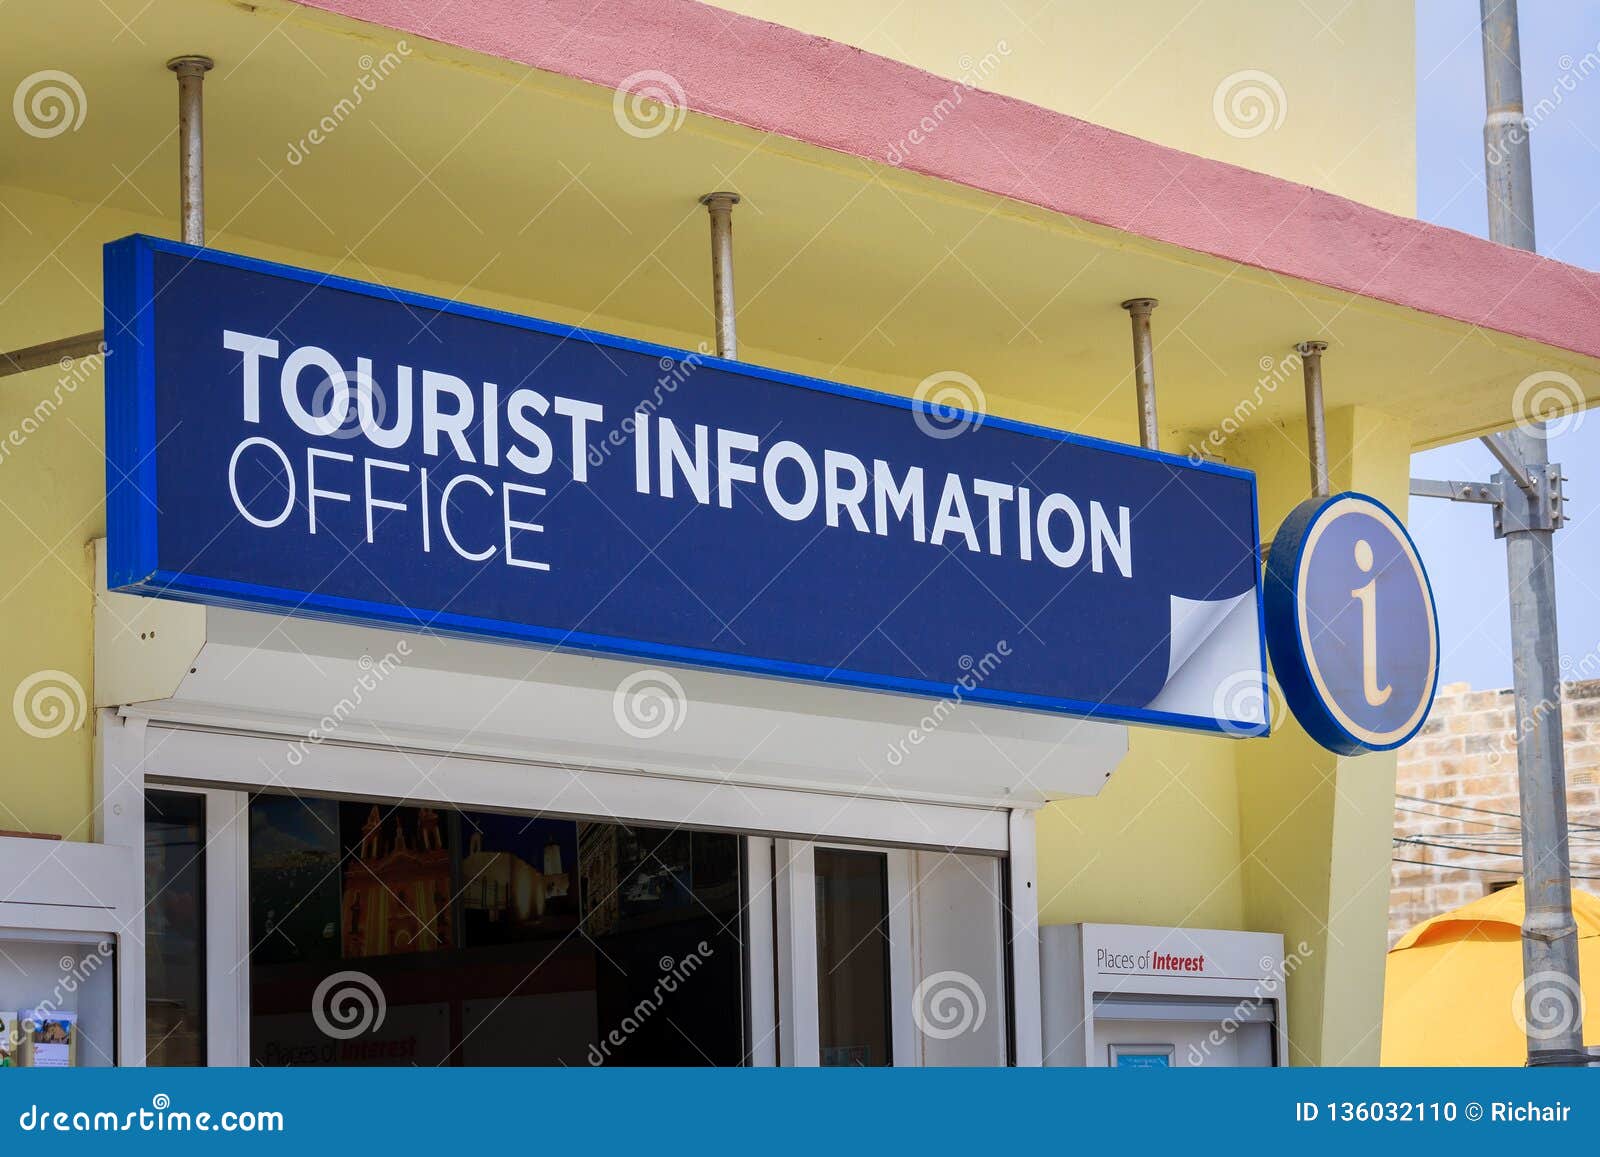 Information office is